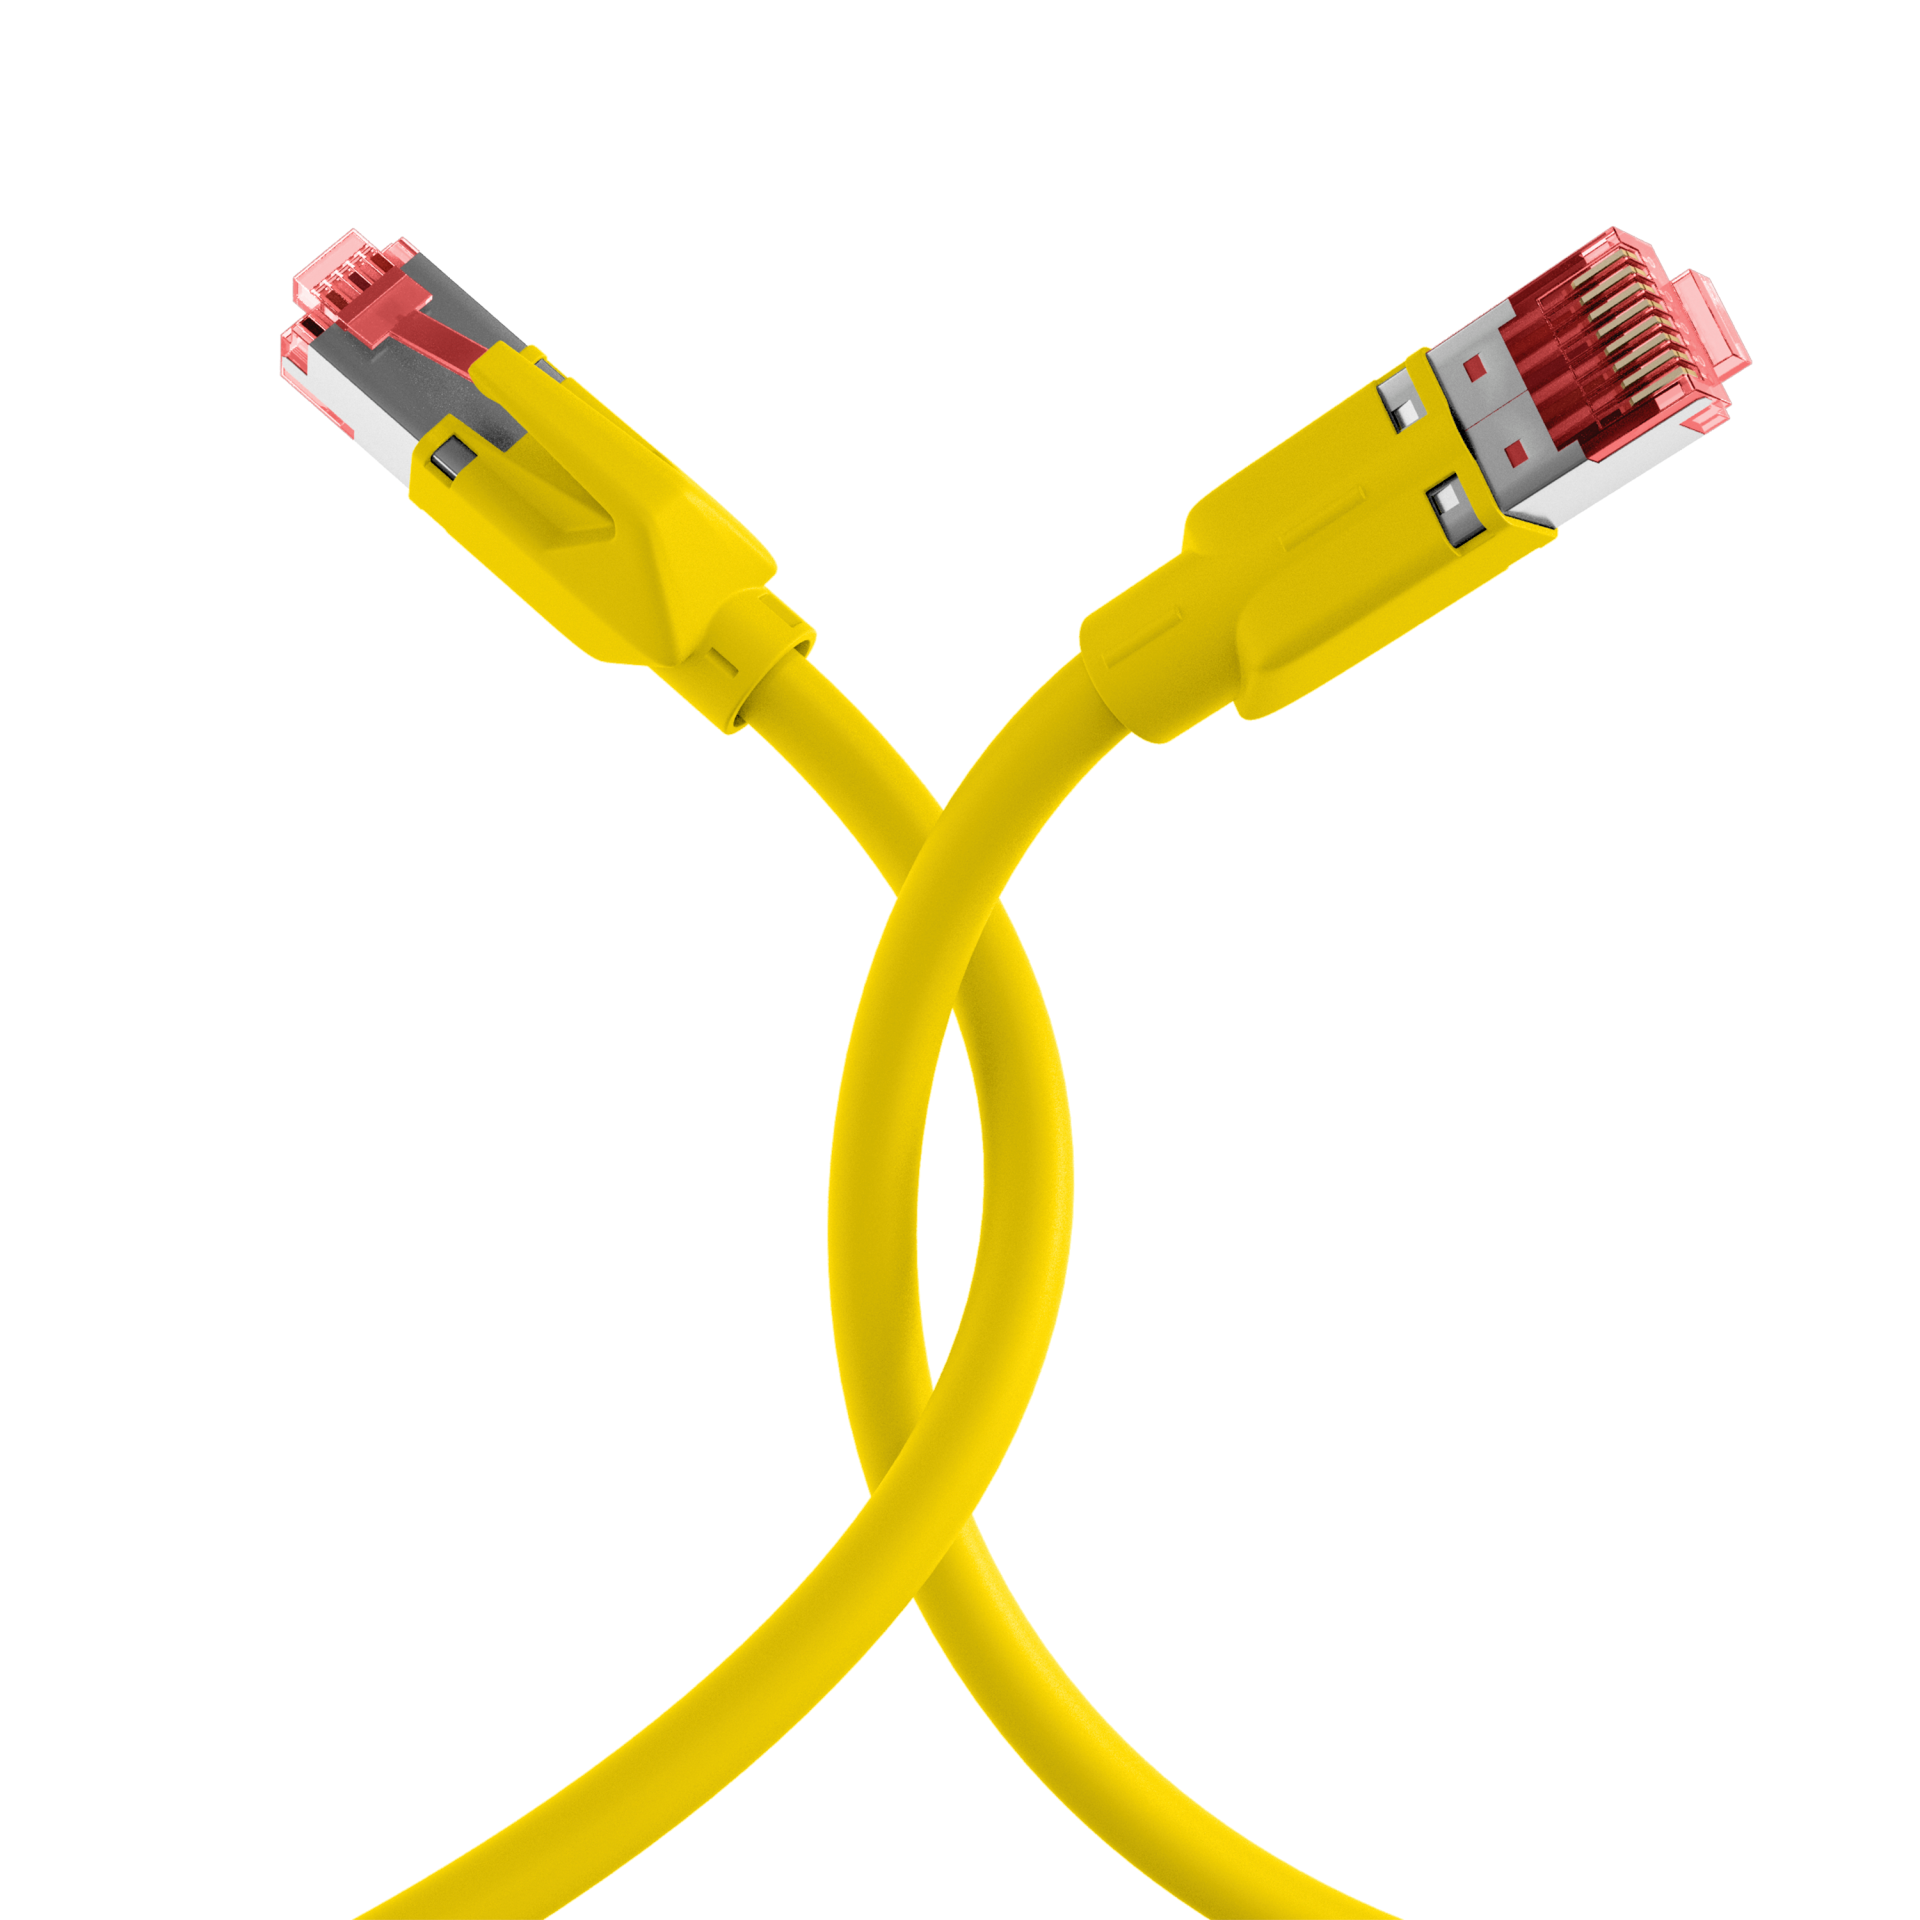 RJ45 Patch Cord Cat.5e S/UTP PUR TM21 for drag chains yellow 5m